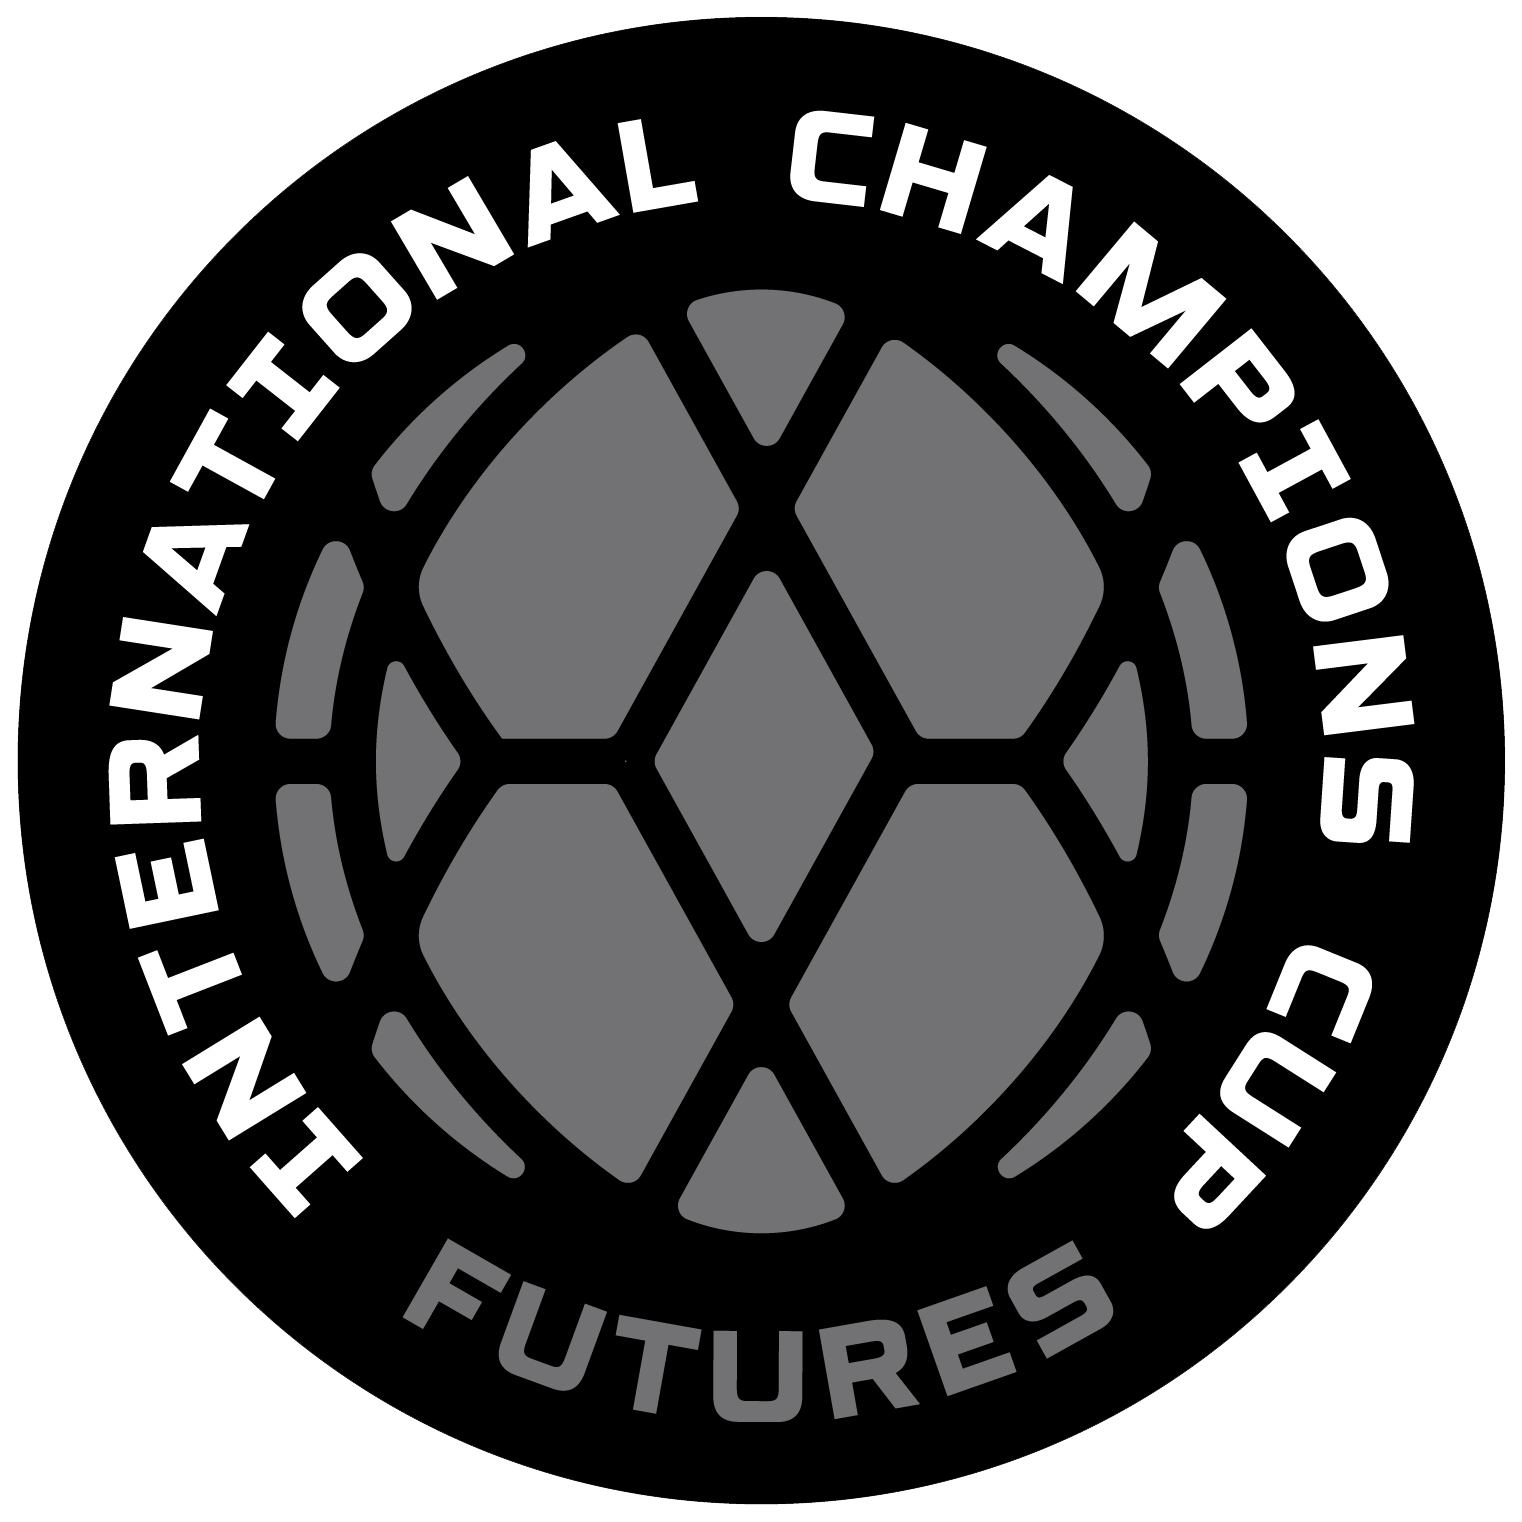 19 International Champions Cup Futures Tournament Img Academy